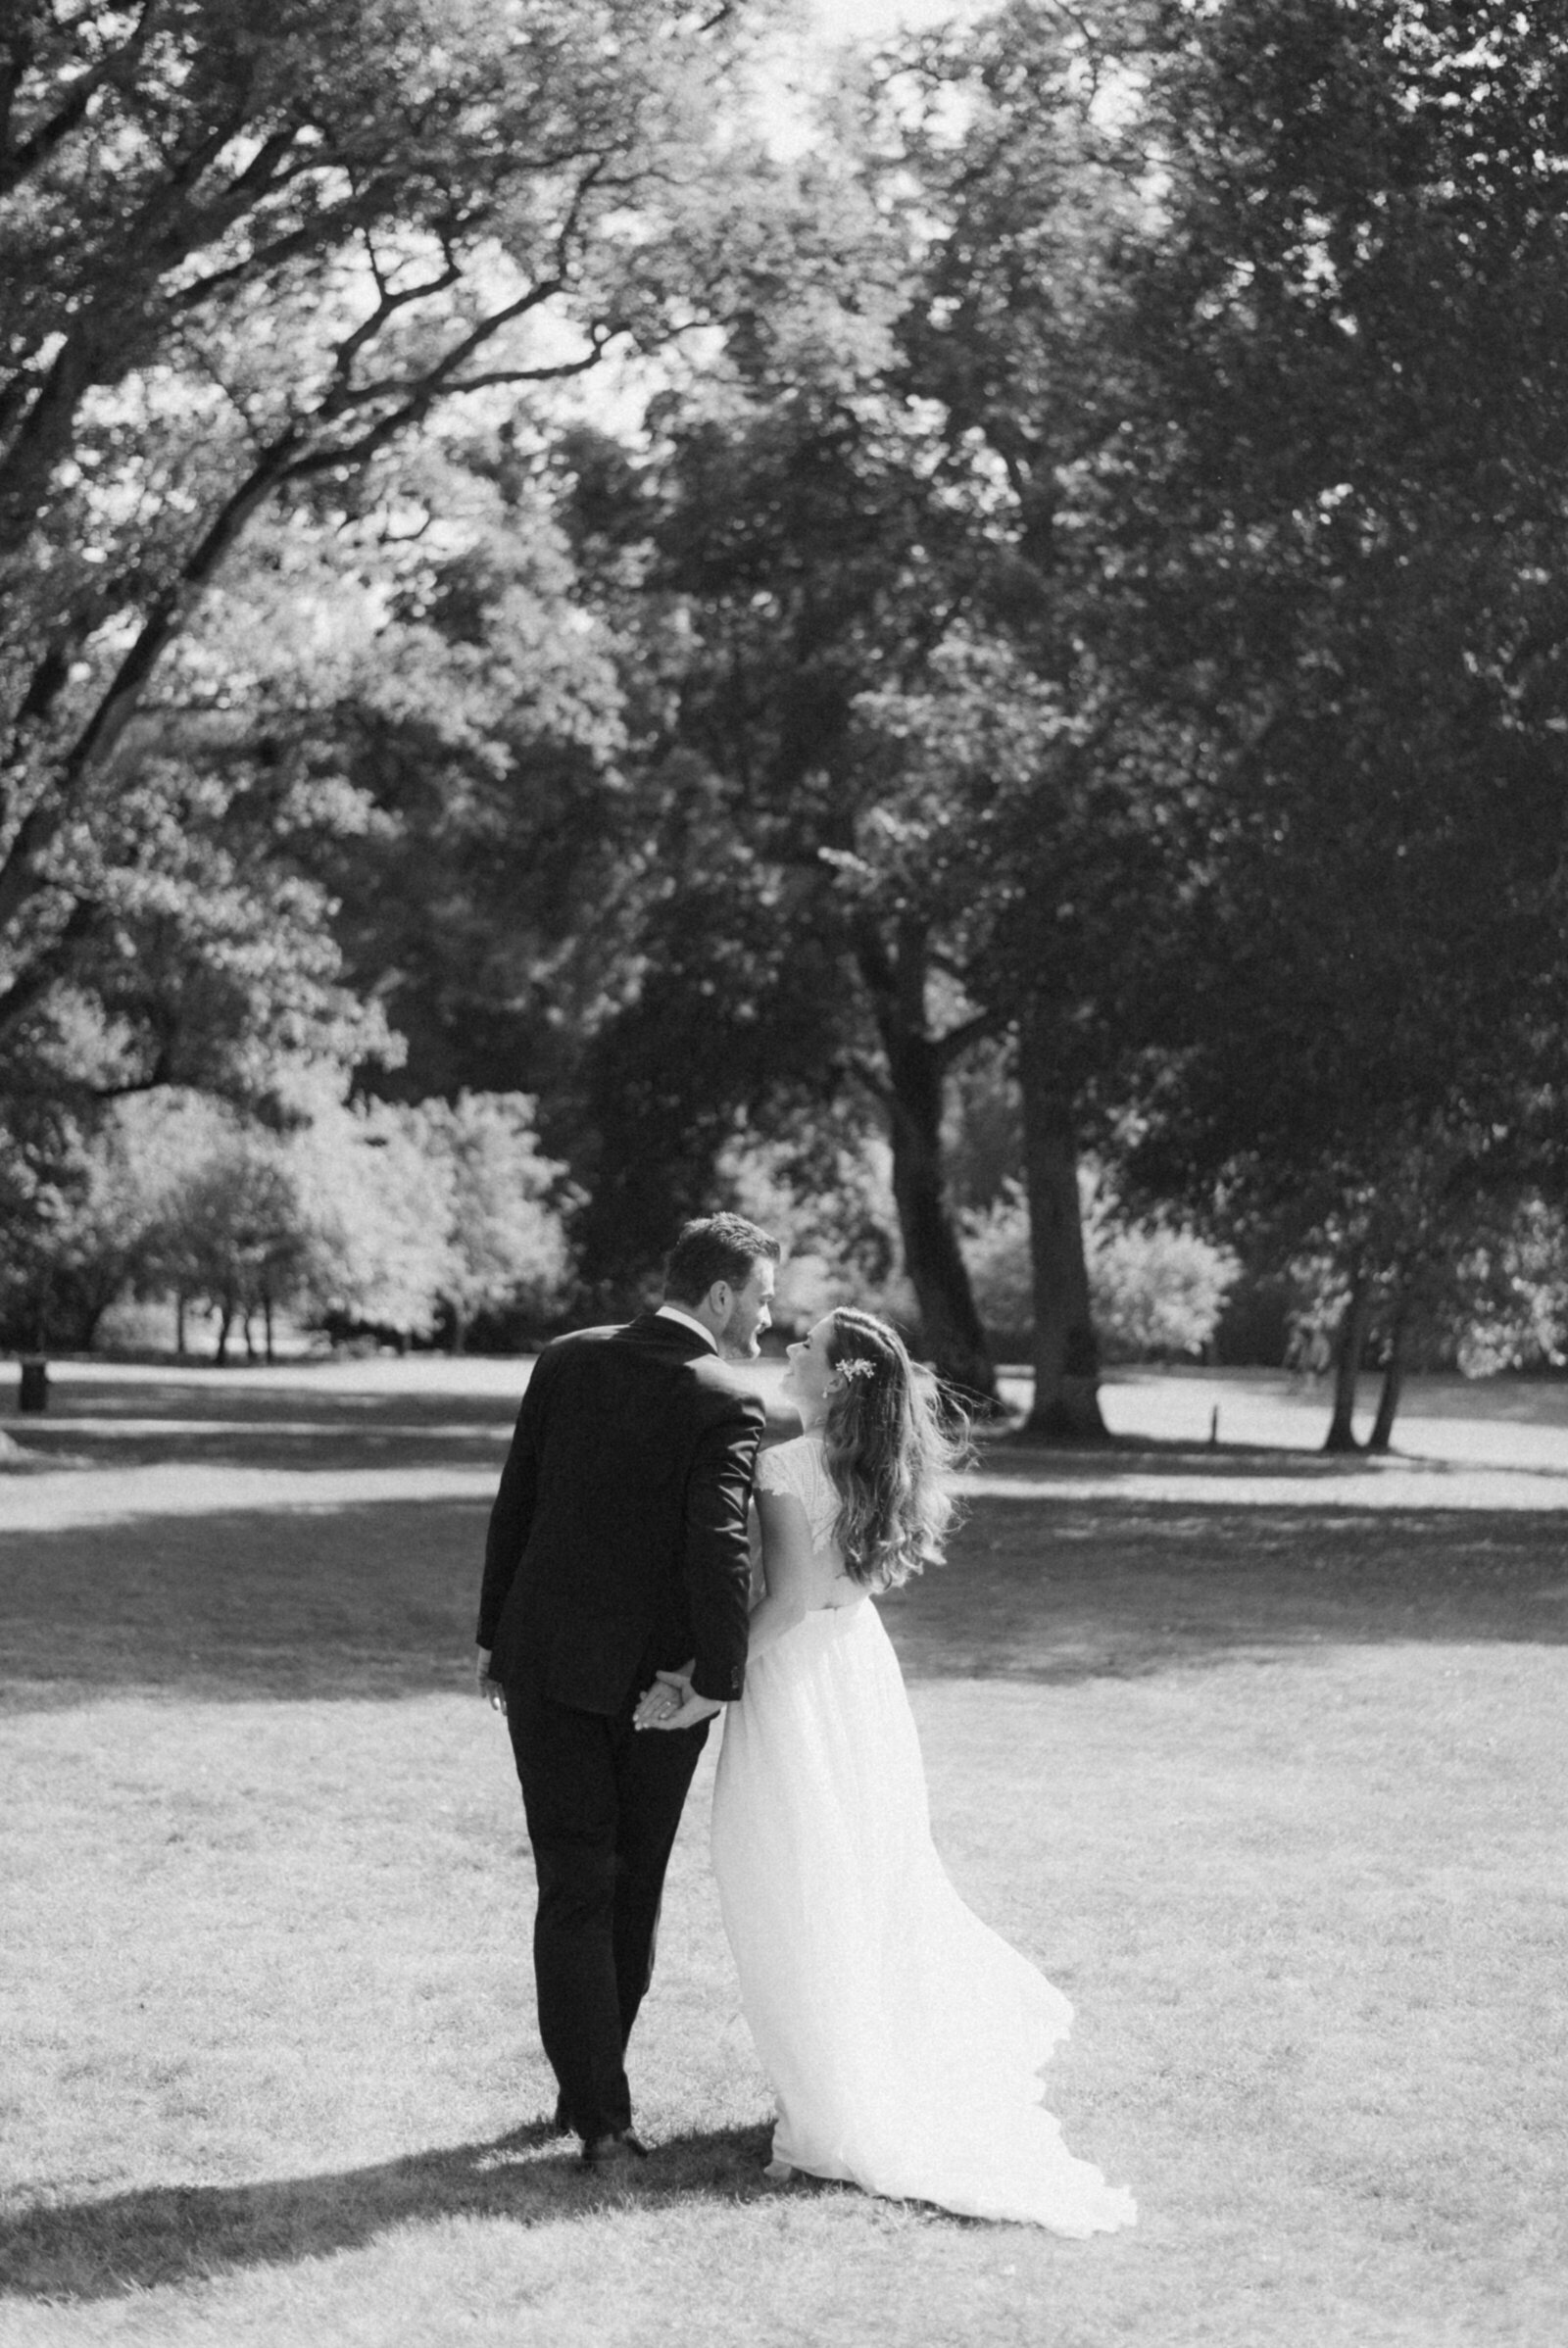 A wedding couple walking in a park during their elopement shoot with wedding photographer Hannika Gabrielsson.